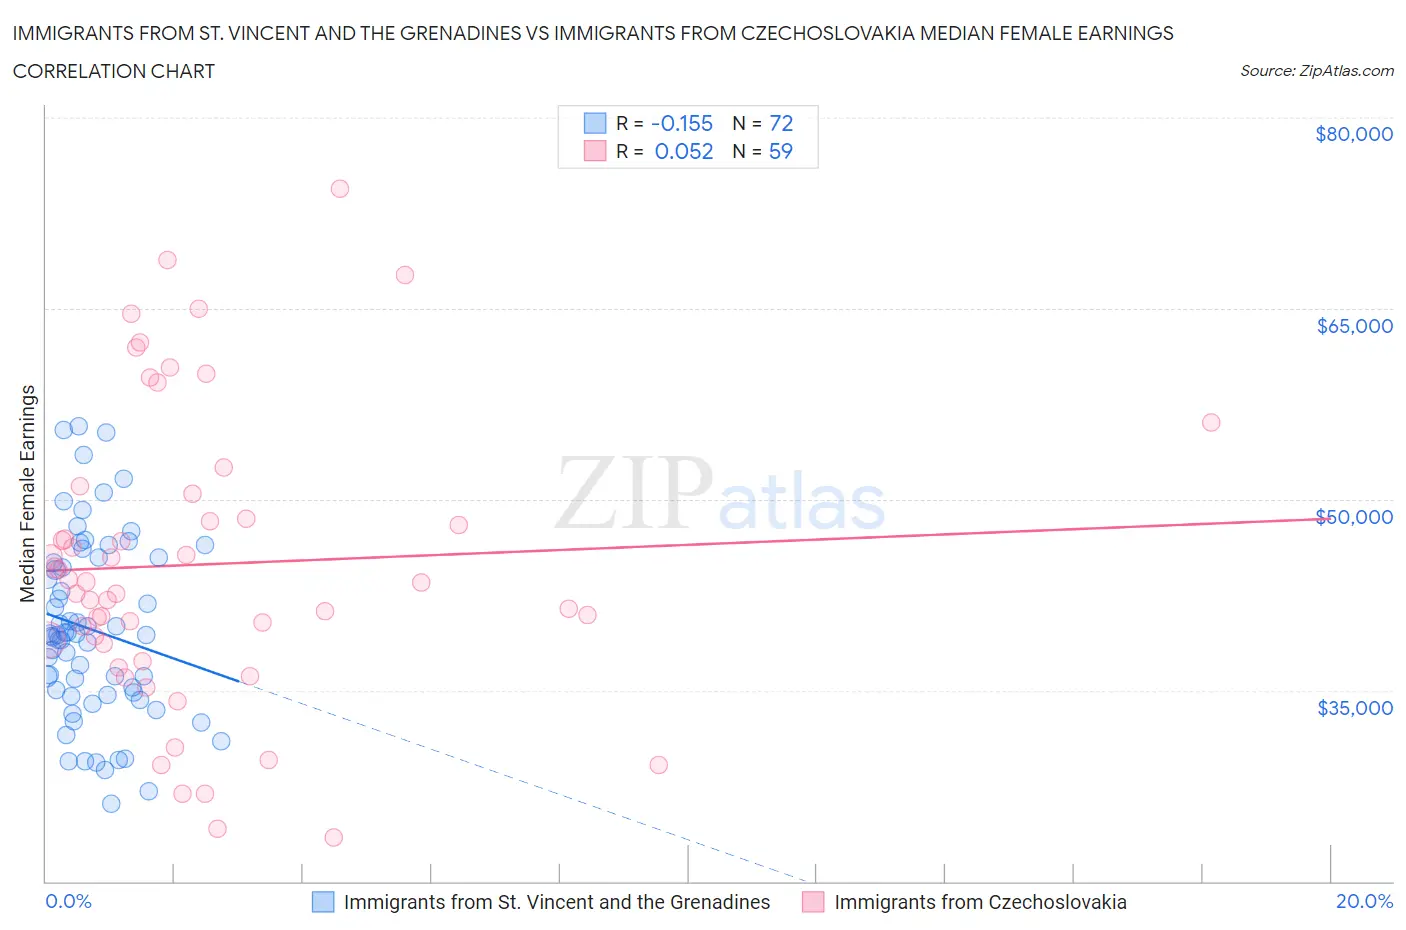 Immigrants from St. Vincent and the Grenadines vs Immigrants from Czechoslovakia Median Female Earnings